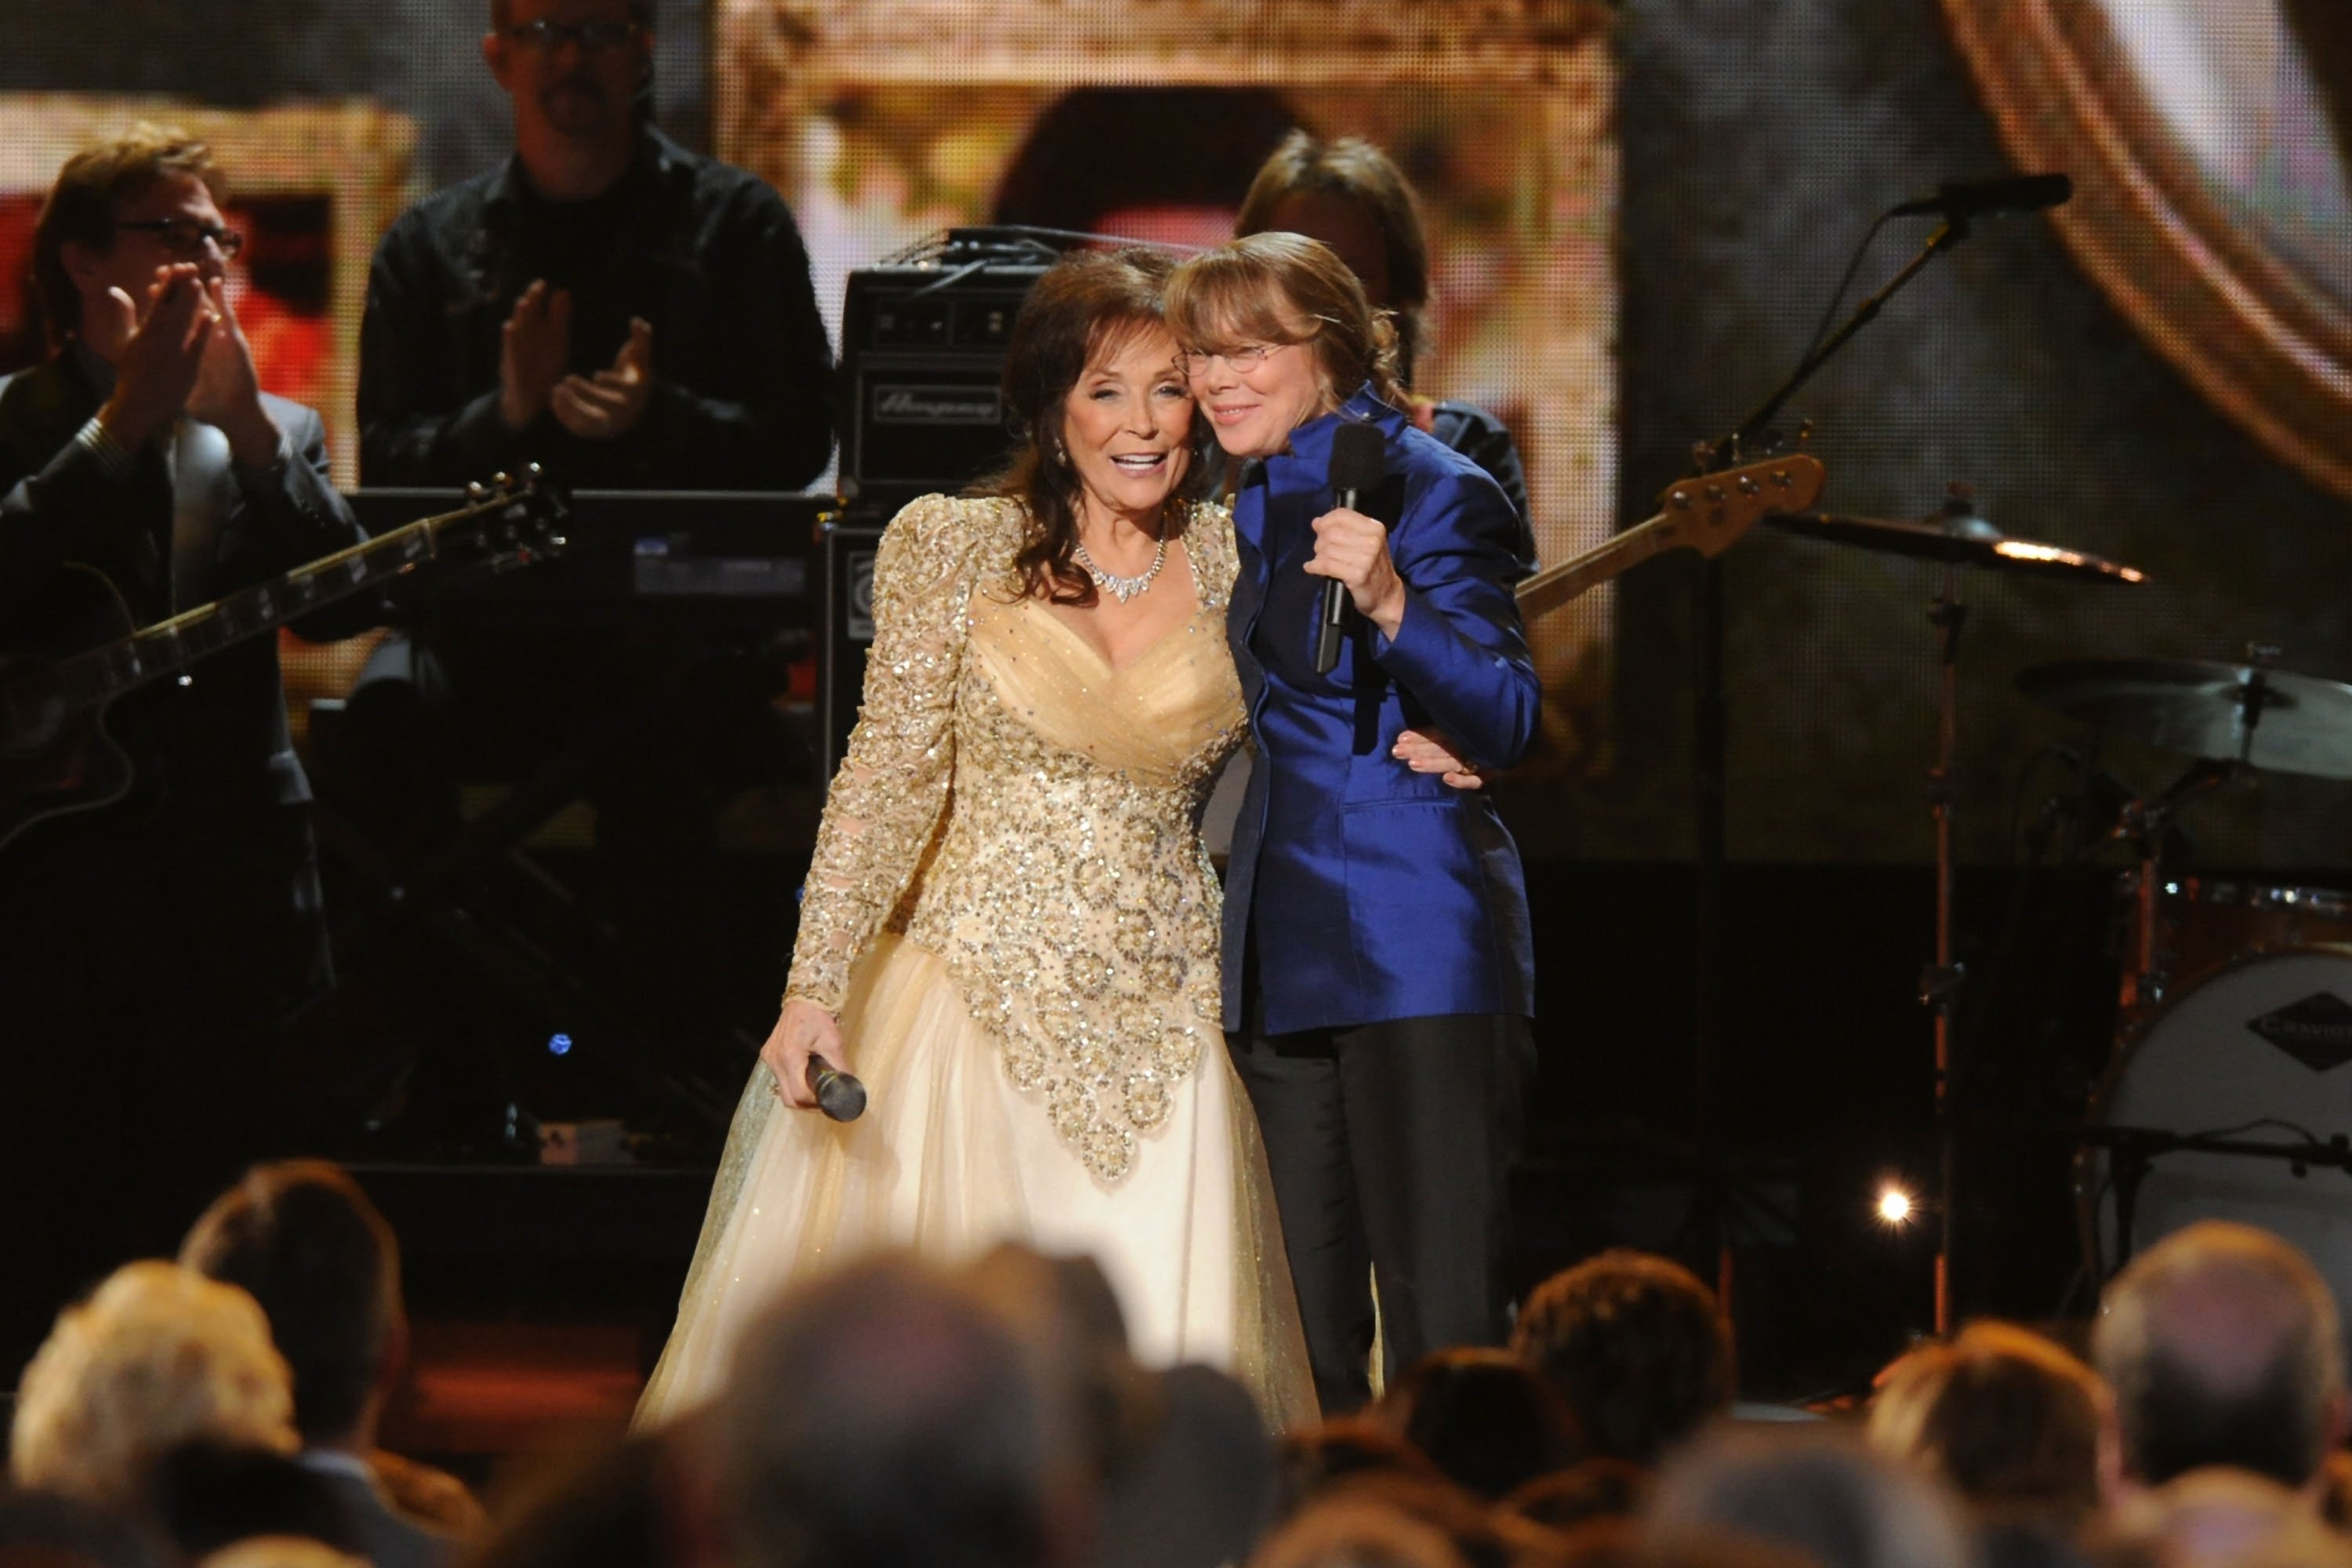 Loretta Lynn and actress Sissy Spacek speak at the 44th Annual CMA Awards at the Bridgestone Arena on November 10, 2010, in Nashville, Tennessee. | Source: Getty Images.